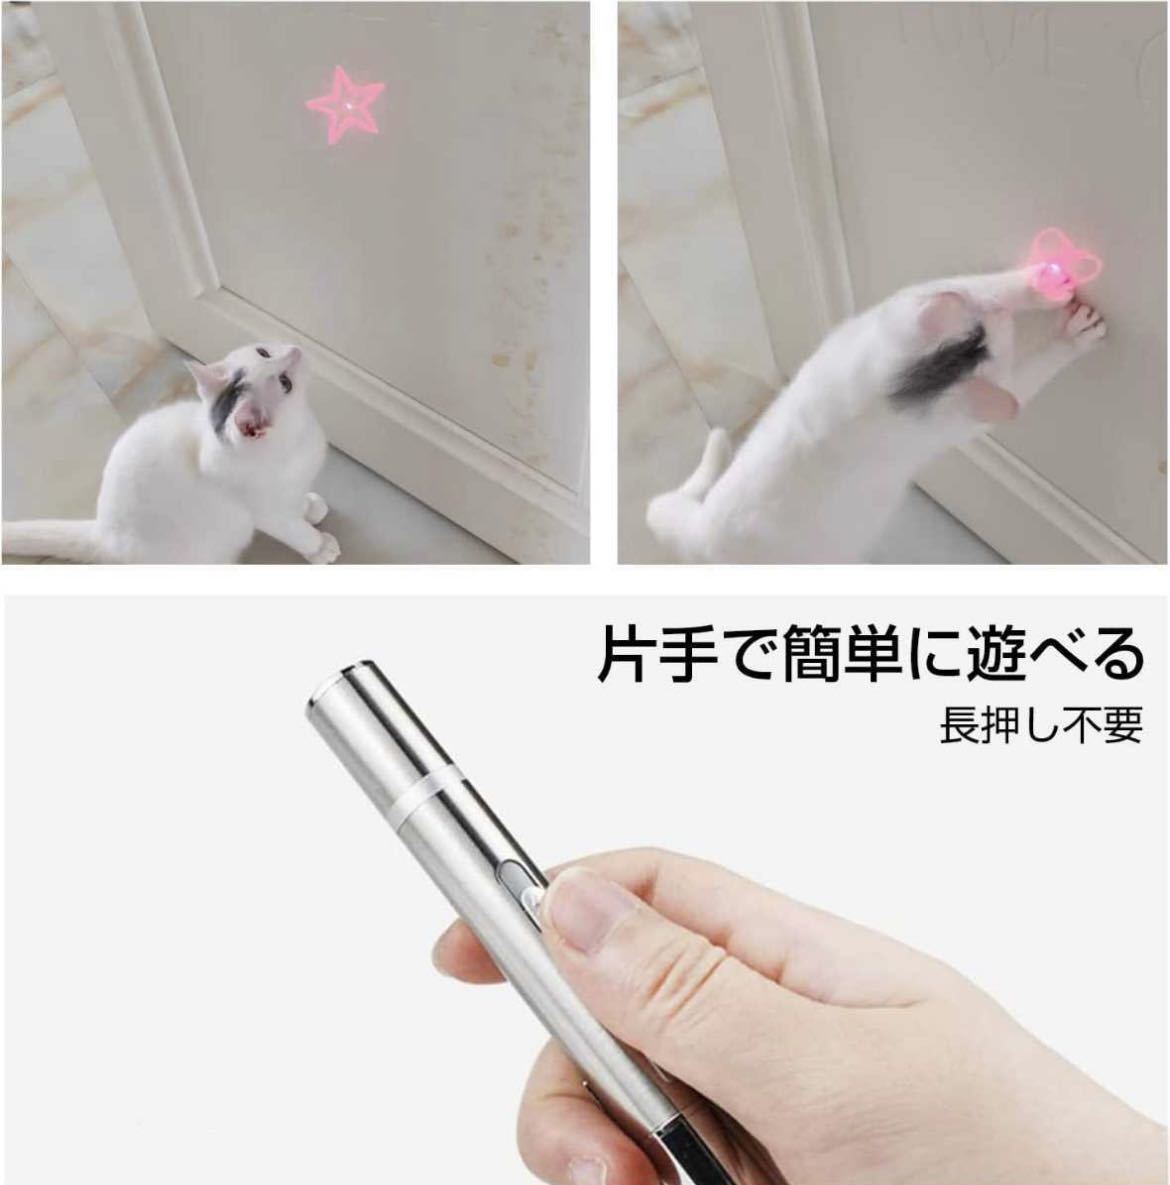  laser pointer cat toy rechargeable USB motion shortage cancellation toy laser pointer LED light cat .... cat toy -stroke less cancellation 